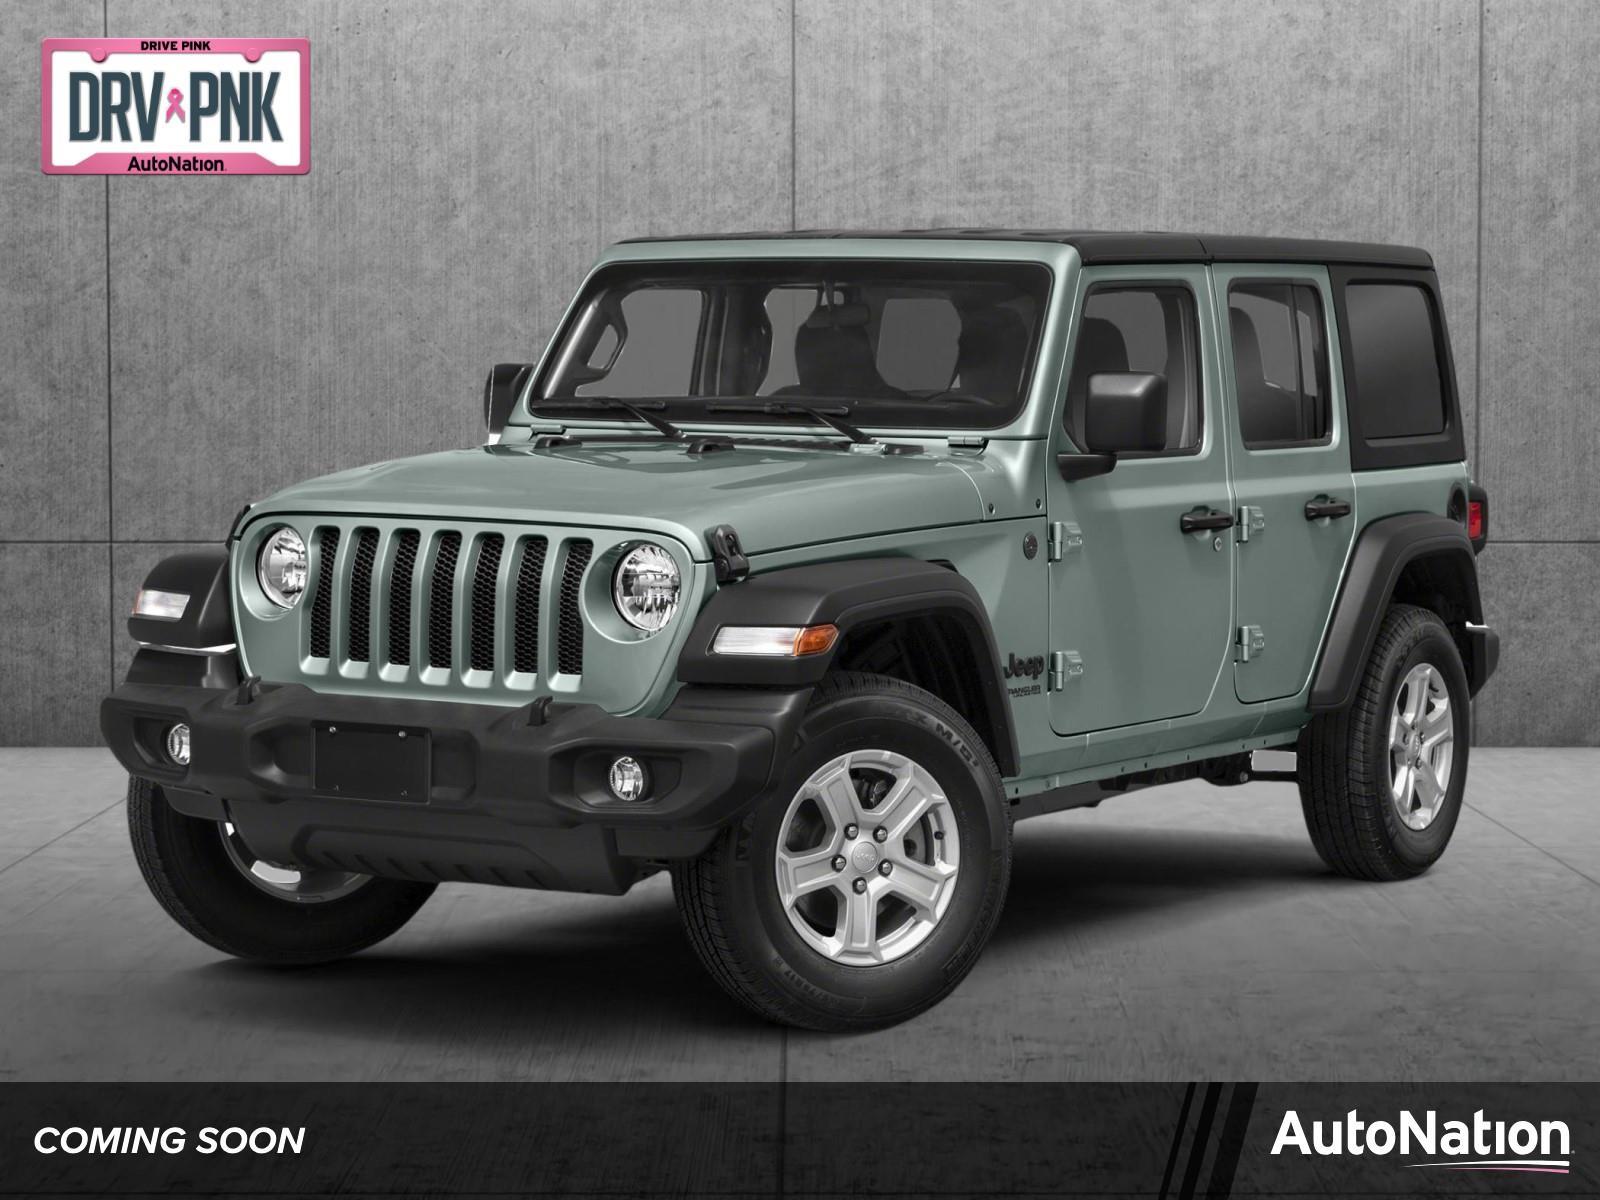 NEW 2023 Jeep Wrangler for sale in Spring, TX 77388 - AutoNation